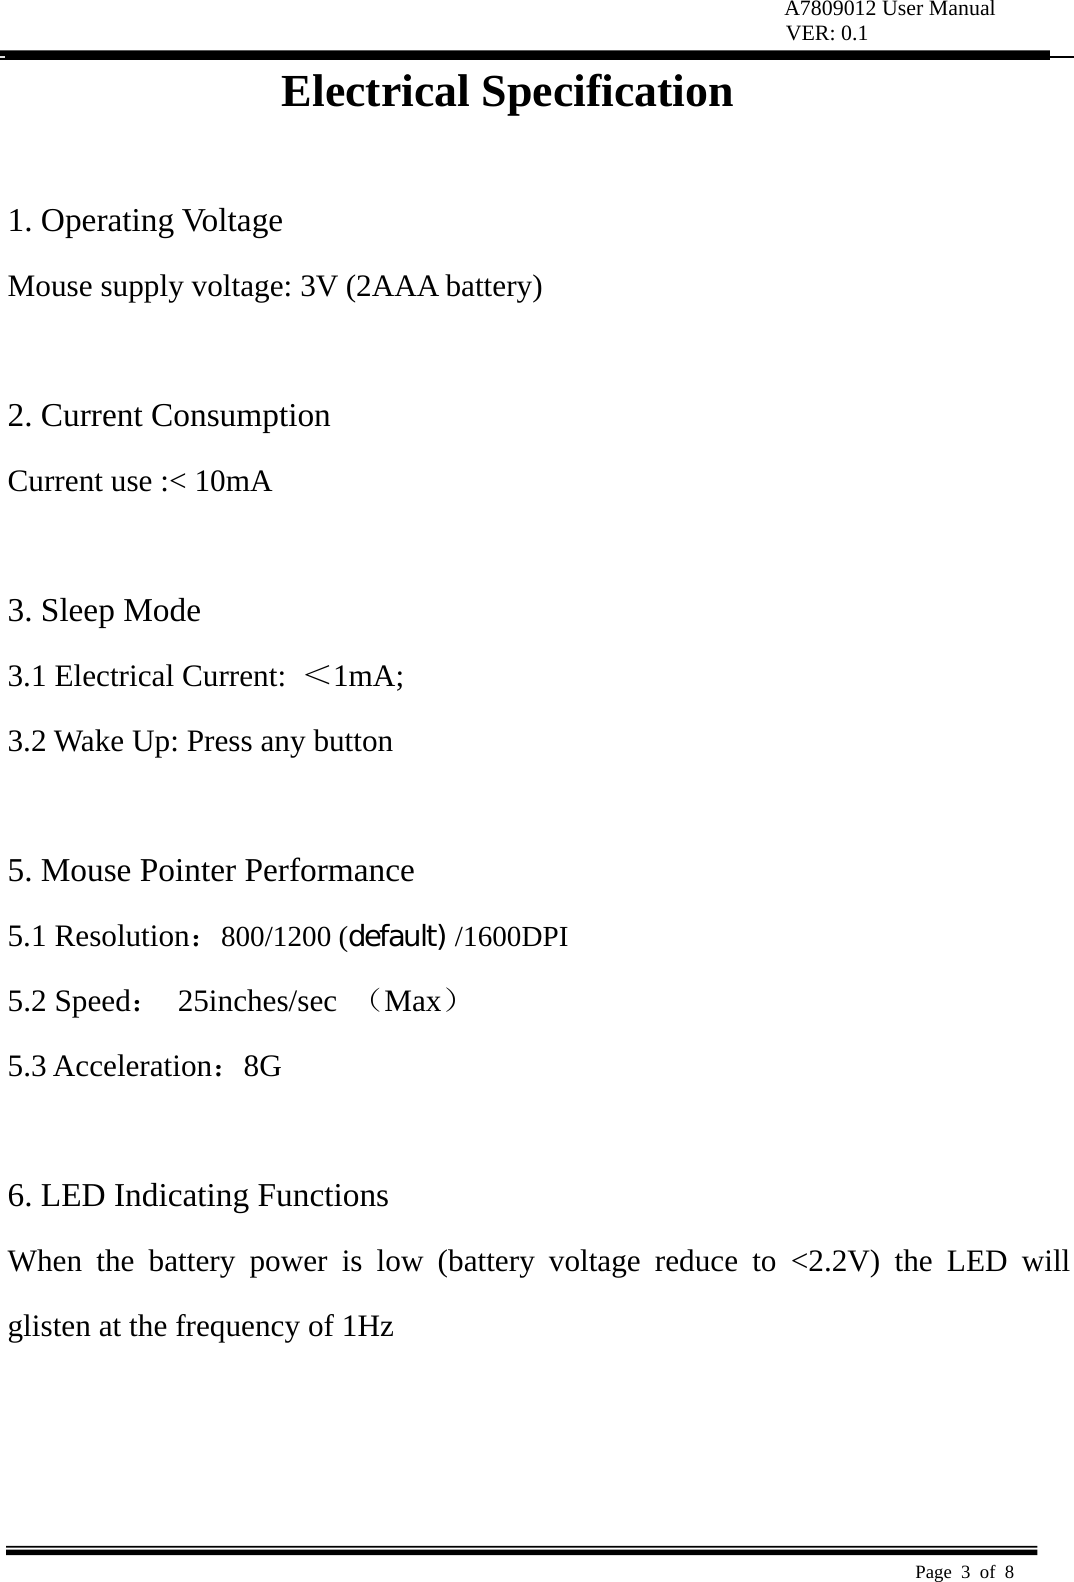 A7809012 User Manual VER: 0.1  Page 3 of 8   Electrical Specification  1. Operating Voltage   Mouse supply voltage: 3V (2AAA battery)    2. Current Consumption   Current use :&lt; 10mA    3. Sleep Mode   3.1 Electrical Current:  ＜1mA;  3.2 Wake Up: Press any button    5. Mouse Pointer Performance 5.1 Resolution：800/1200 (default) /1600DPI 5.2 Speed： 25inches/sec （Max） 5.3 Acceleration：8G   6. LED Indicating Functions   When the battery power is low (battery voltage reduce to &lt;2.2V) the LED will glisten at the frequency of 1Hz      